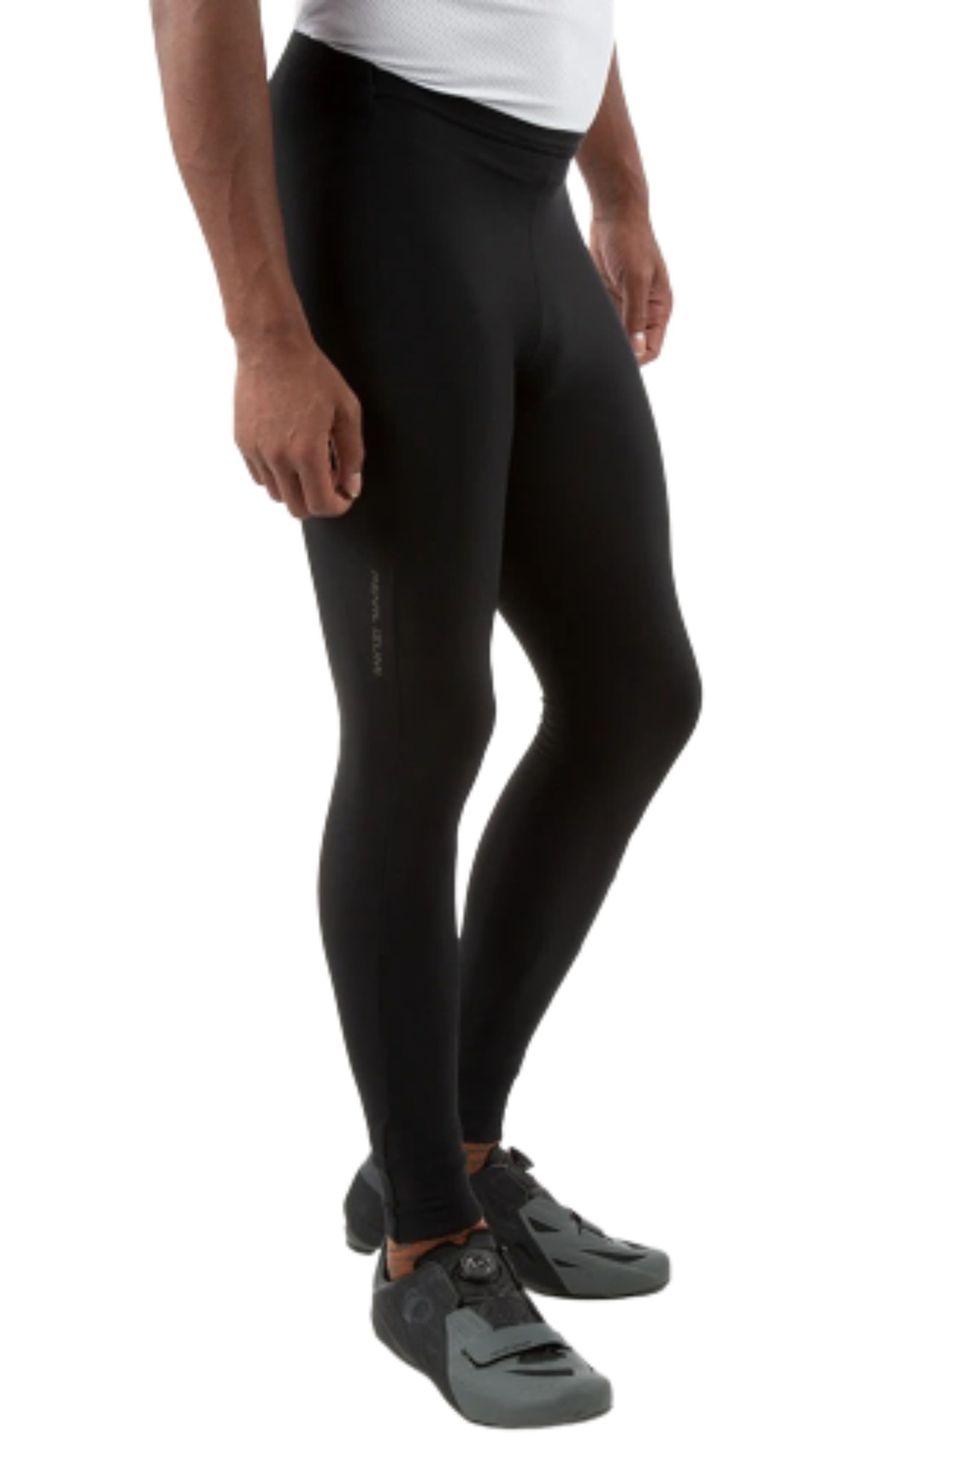 COOVY Men's Thermal Compression Base Layer Leggings (black, winter) Style  W011